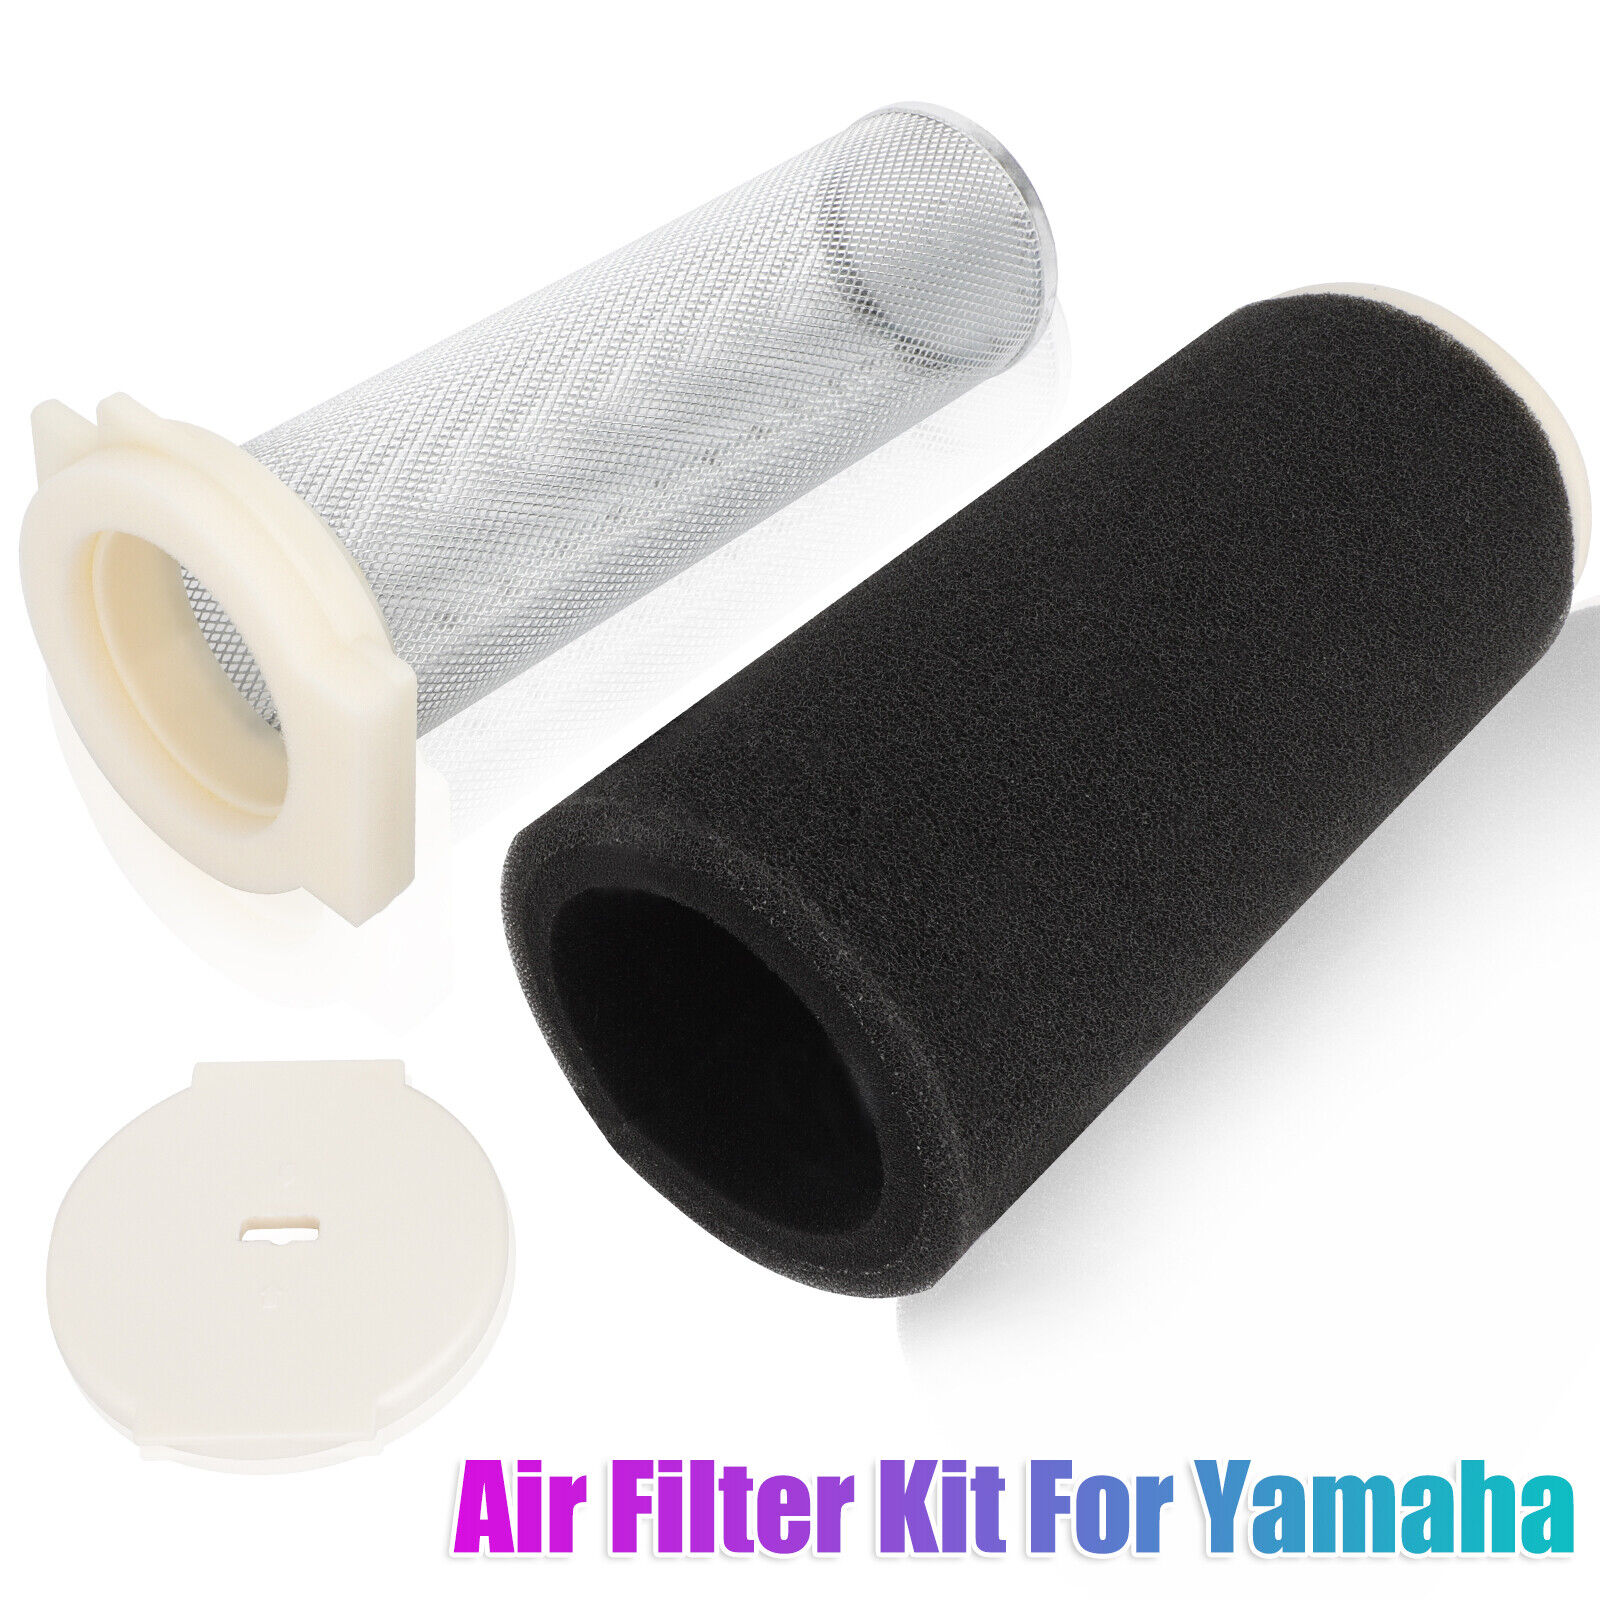 Air Filter & Cage Guide & CAP Kit For Yamaha Grizzly 600 660 98-08 1UY-14458-01